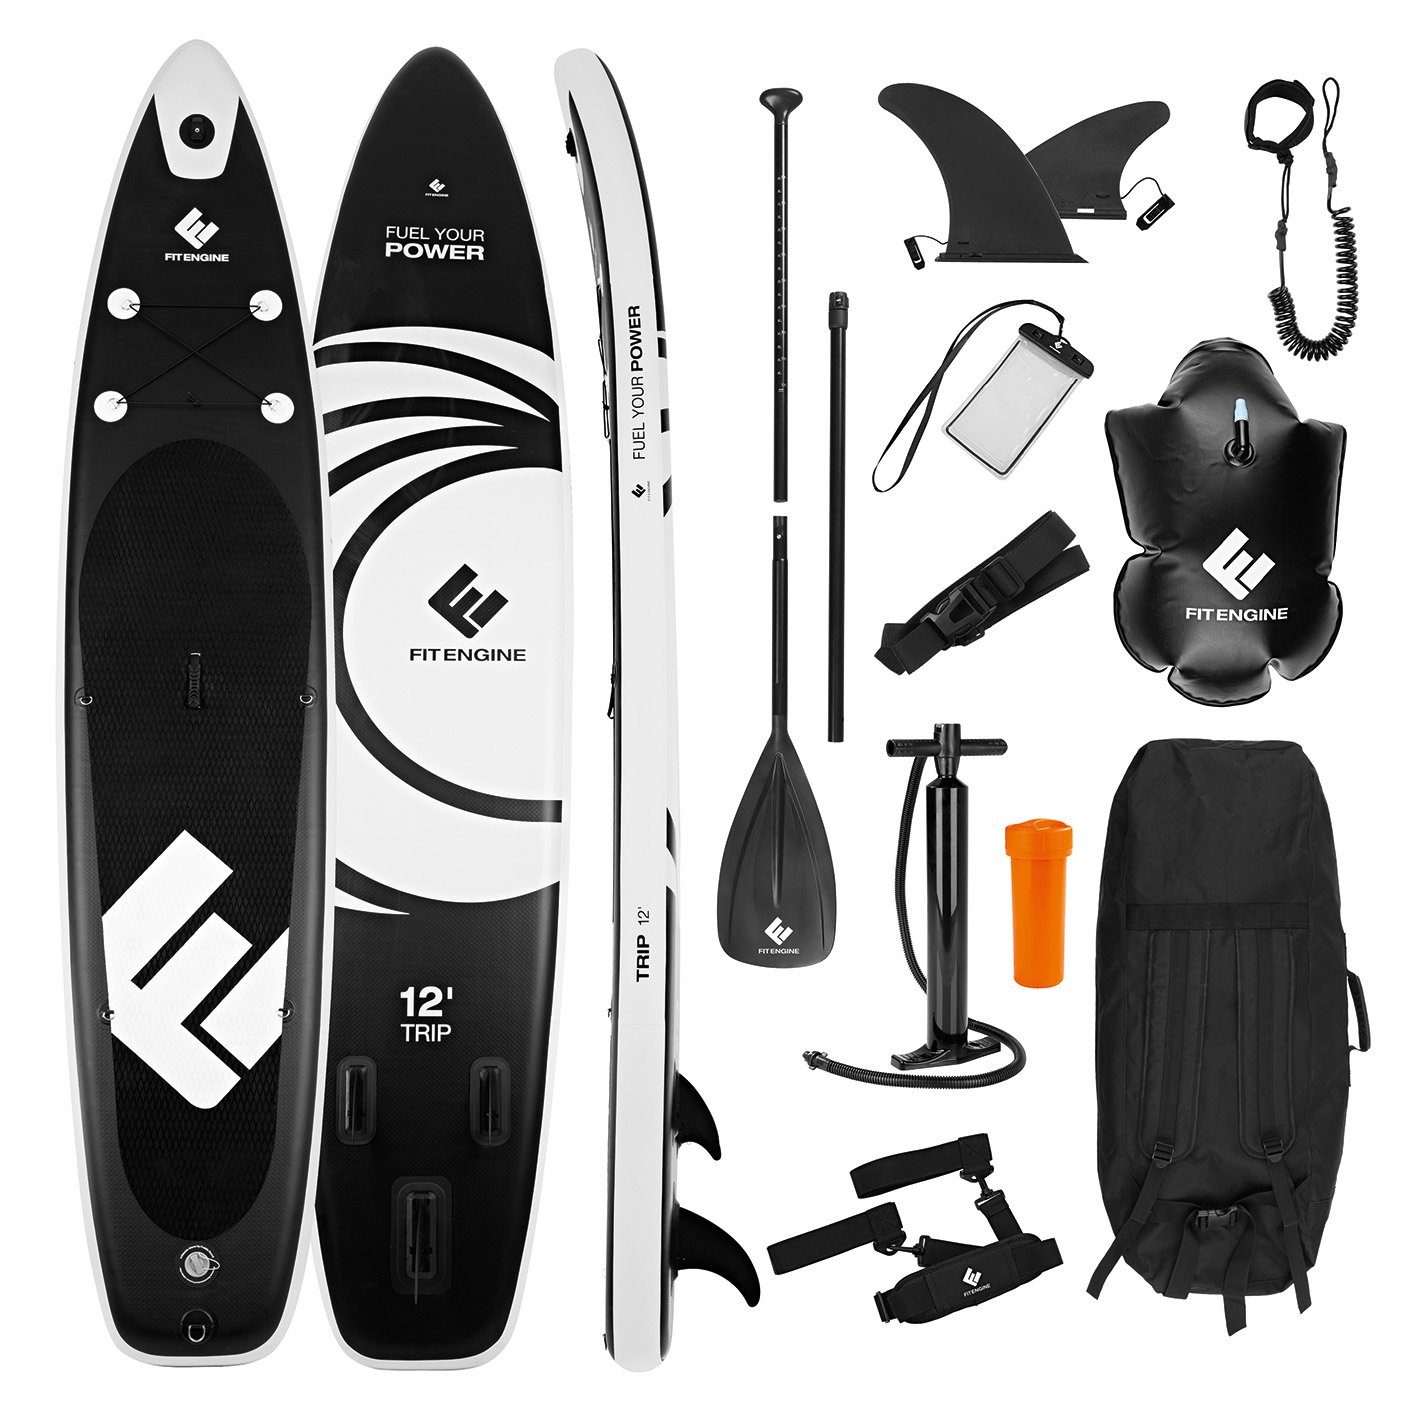 SUP-Board FitEngine Stand 365cm Inflatable 160kg extra Paddle, Up aufblasbar Groß stabil